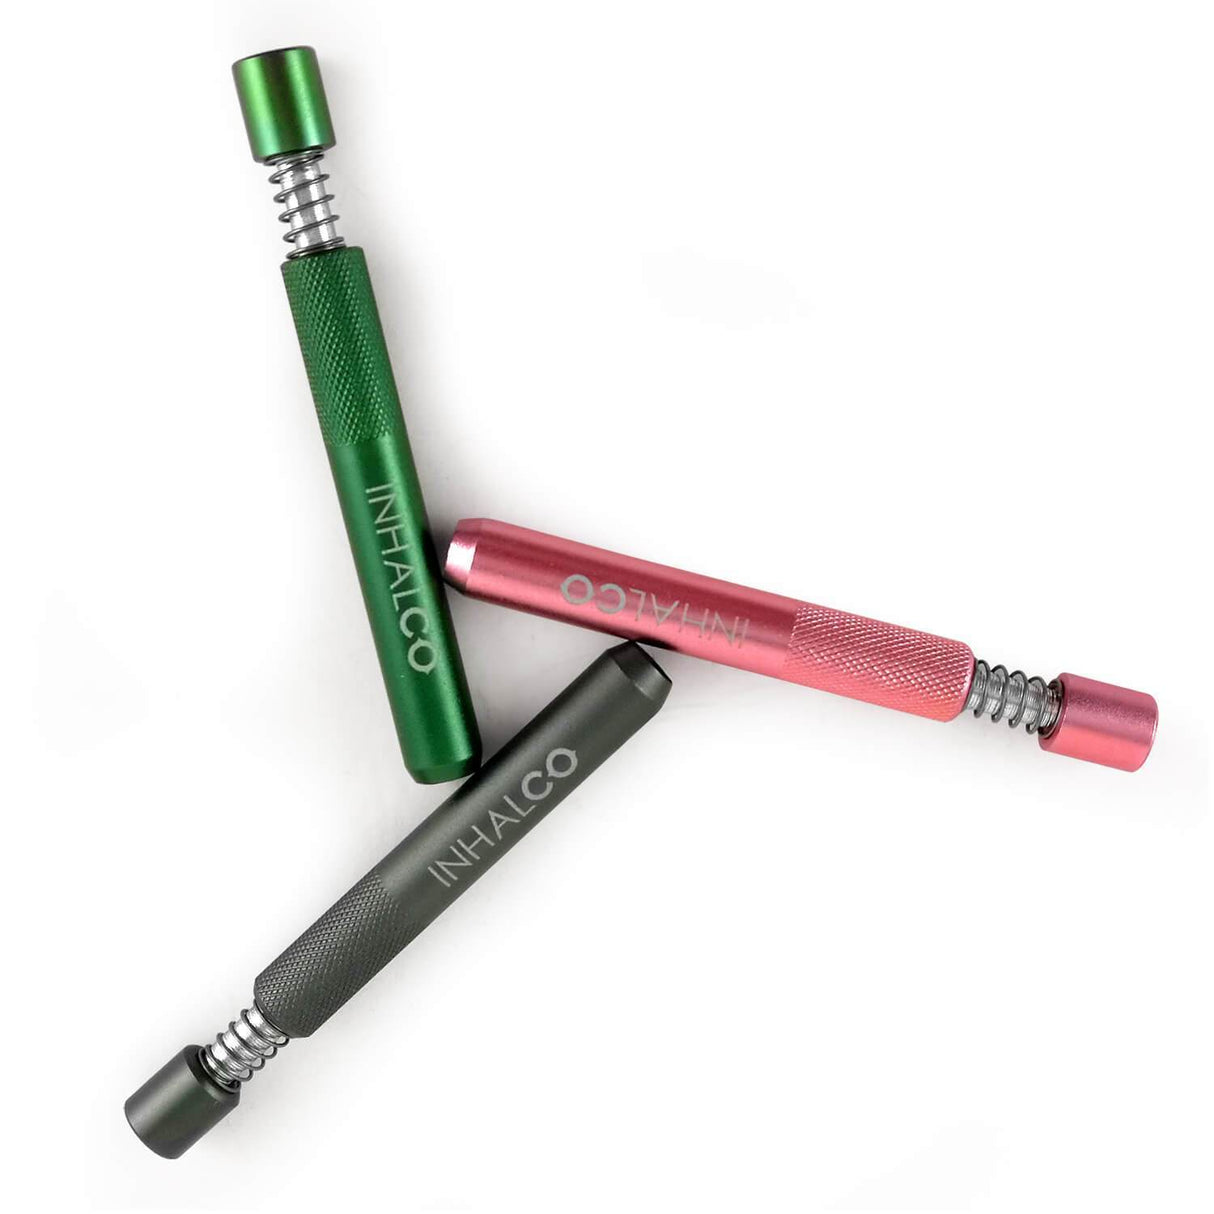 PILOT DIARY One-Hitter Pipes in Green, Red, and Black - Portable and Discreet